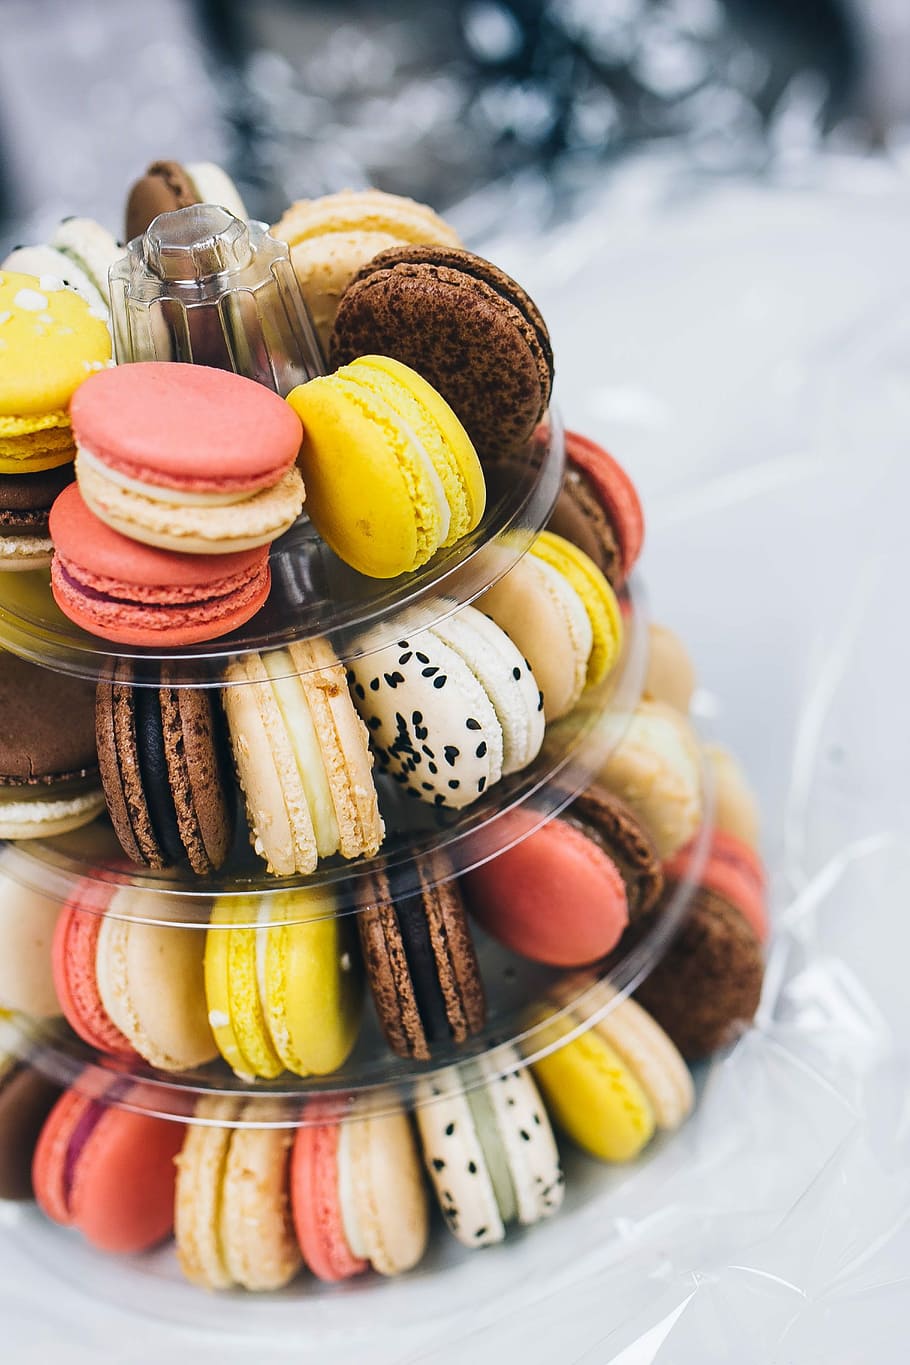 sweet, macarons, arranged, tower, Colourful, candy, tasty, snack, sugar, dessert